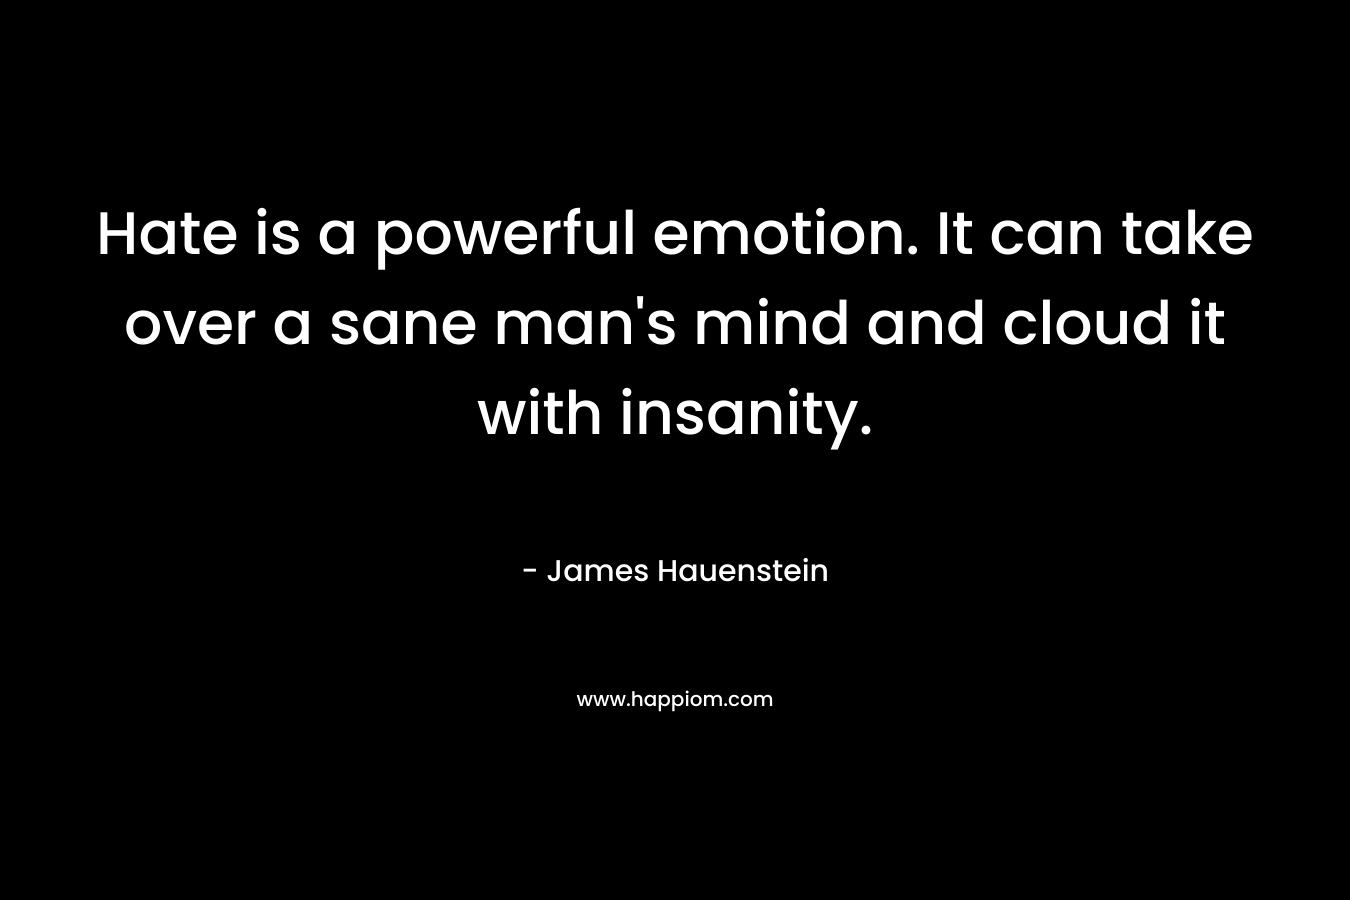 Hate is a powerful emotion. It can take over a sane man's mind and cloud it with insanity.